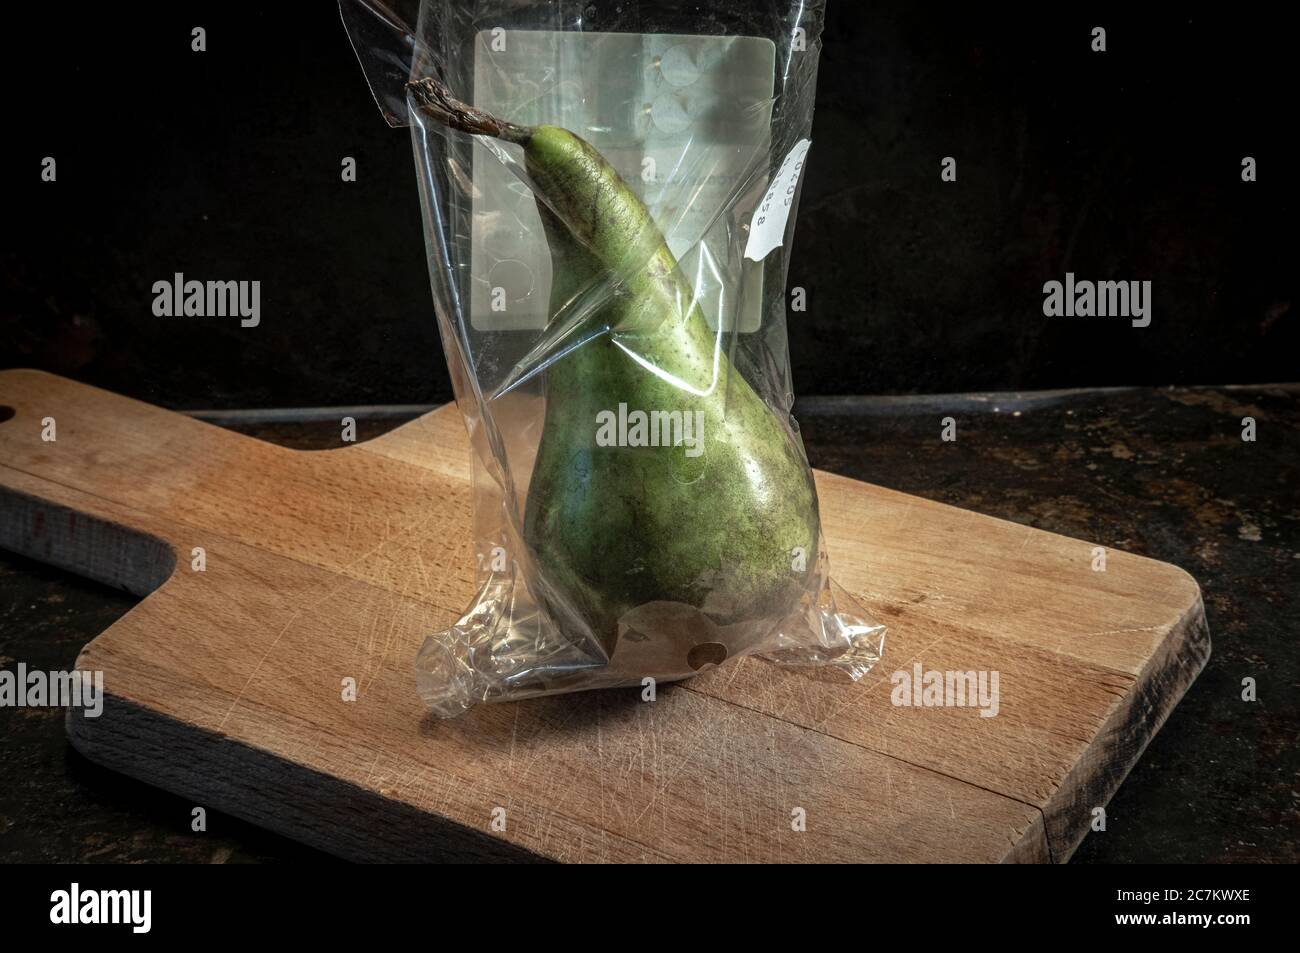 pear packed in non-biodegradable plastics Stock Photo